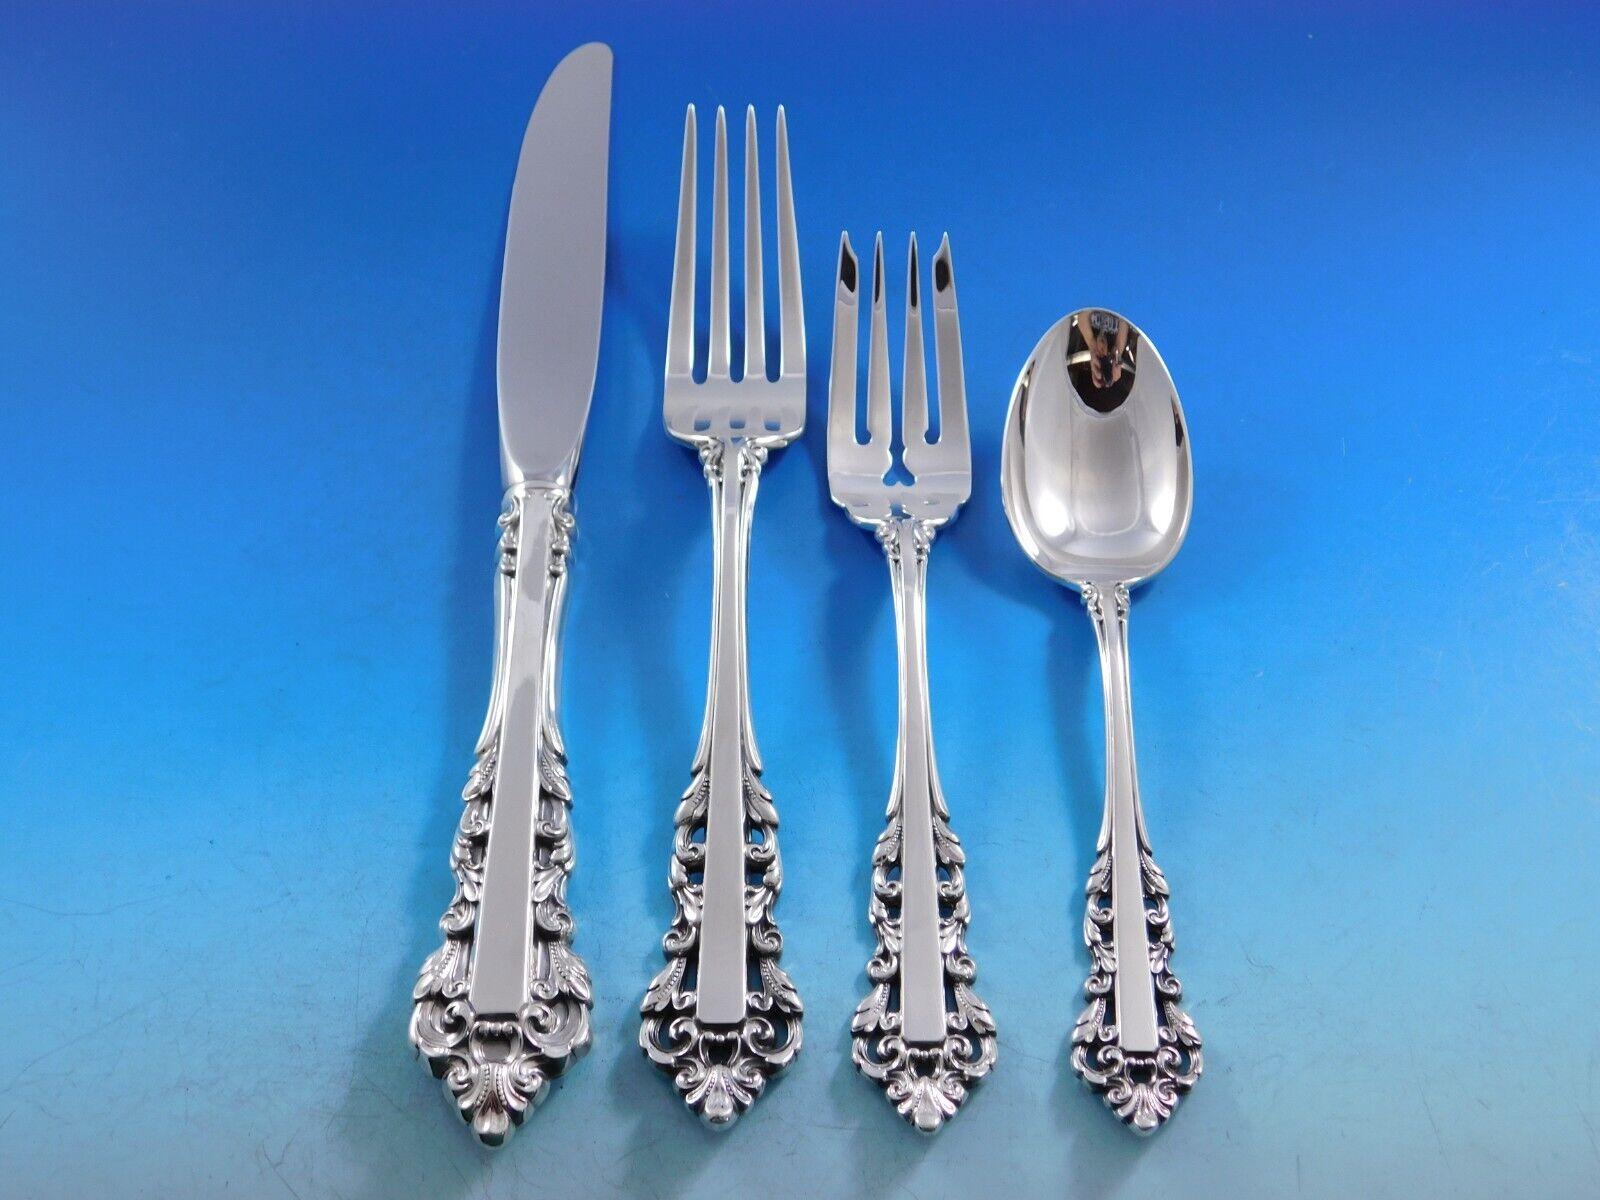 Medici New by Gorham Sterling Silver Flatware Set Service 72 Pieces Dinner Size In Excellent Condition For Sale In Big Bend, WI